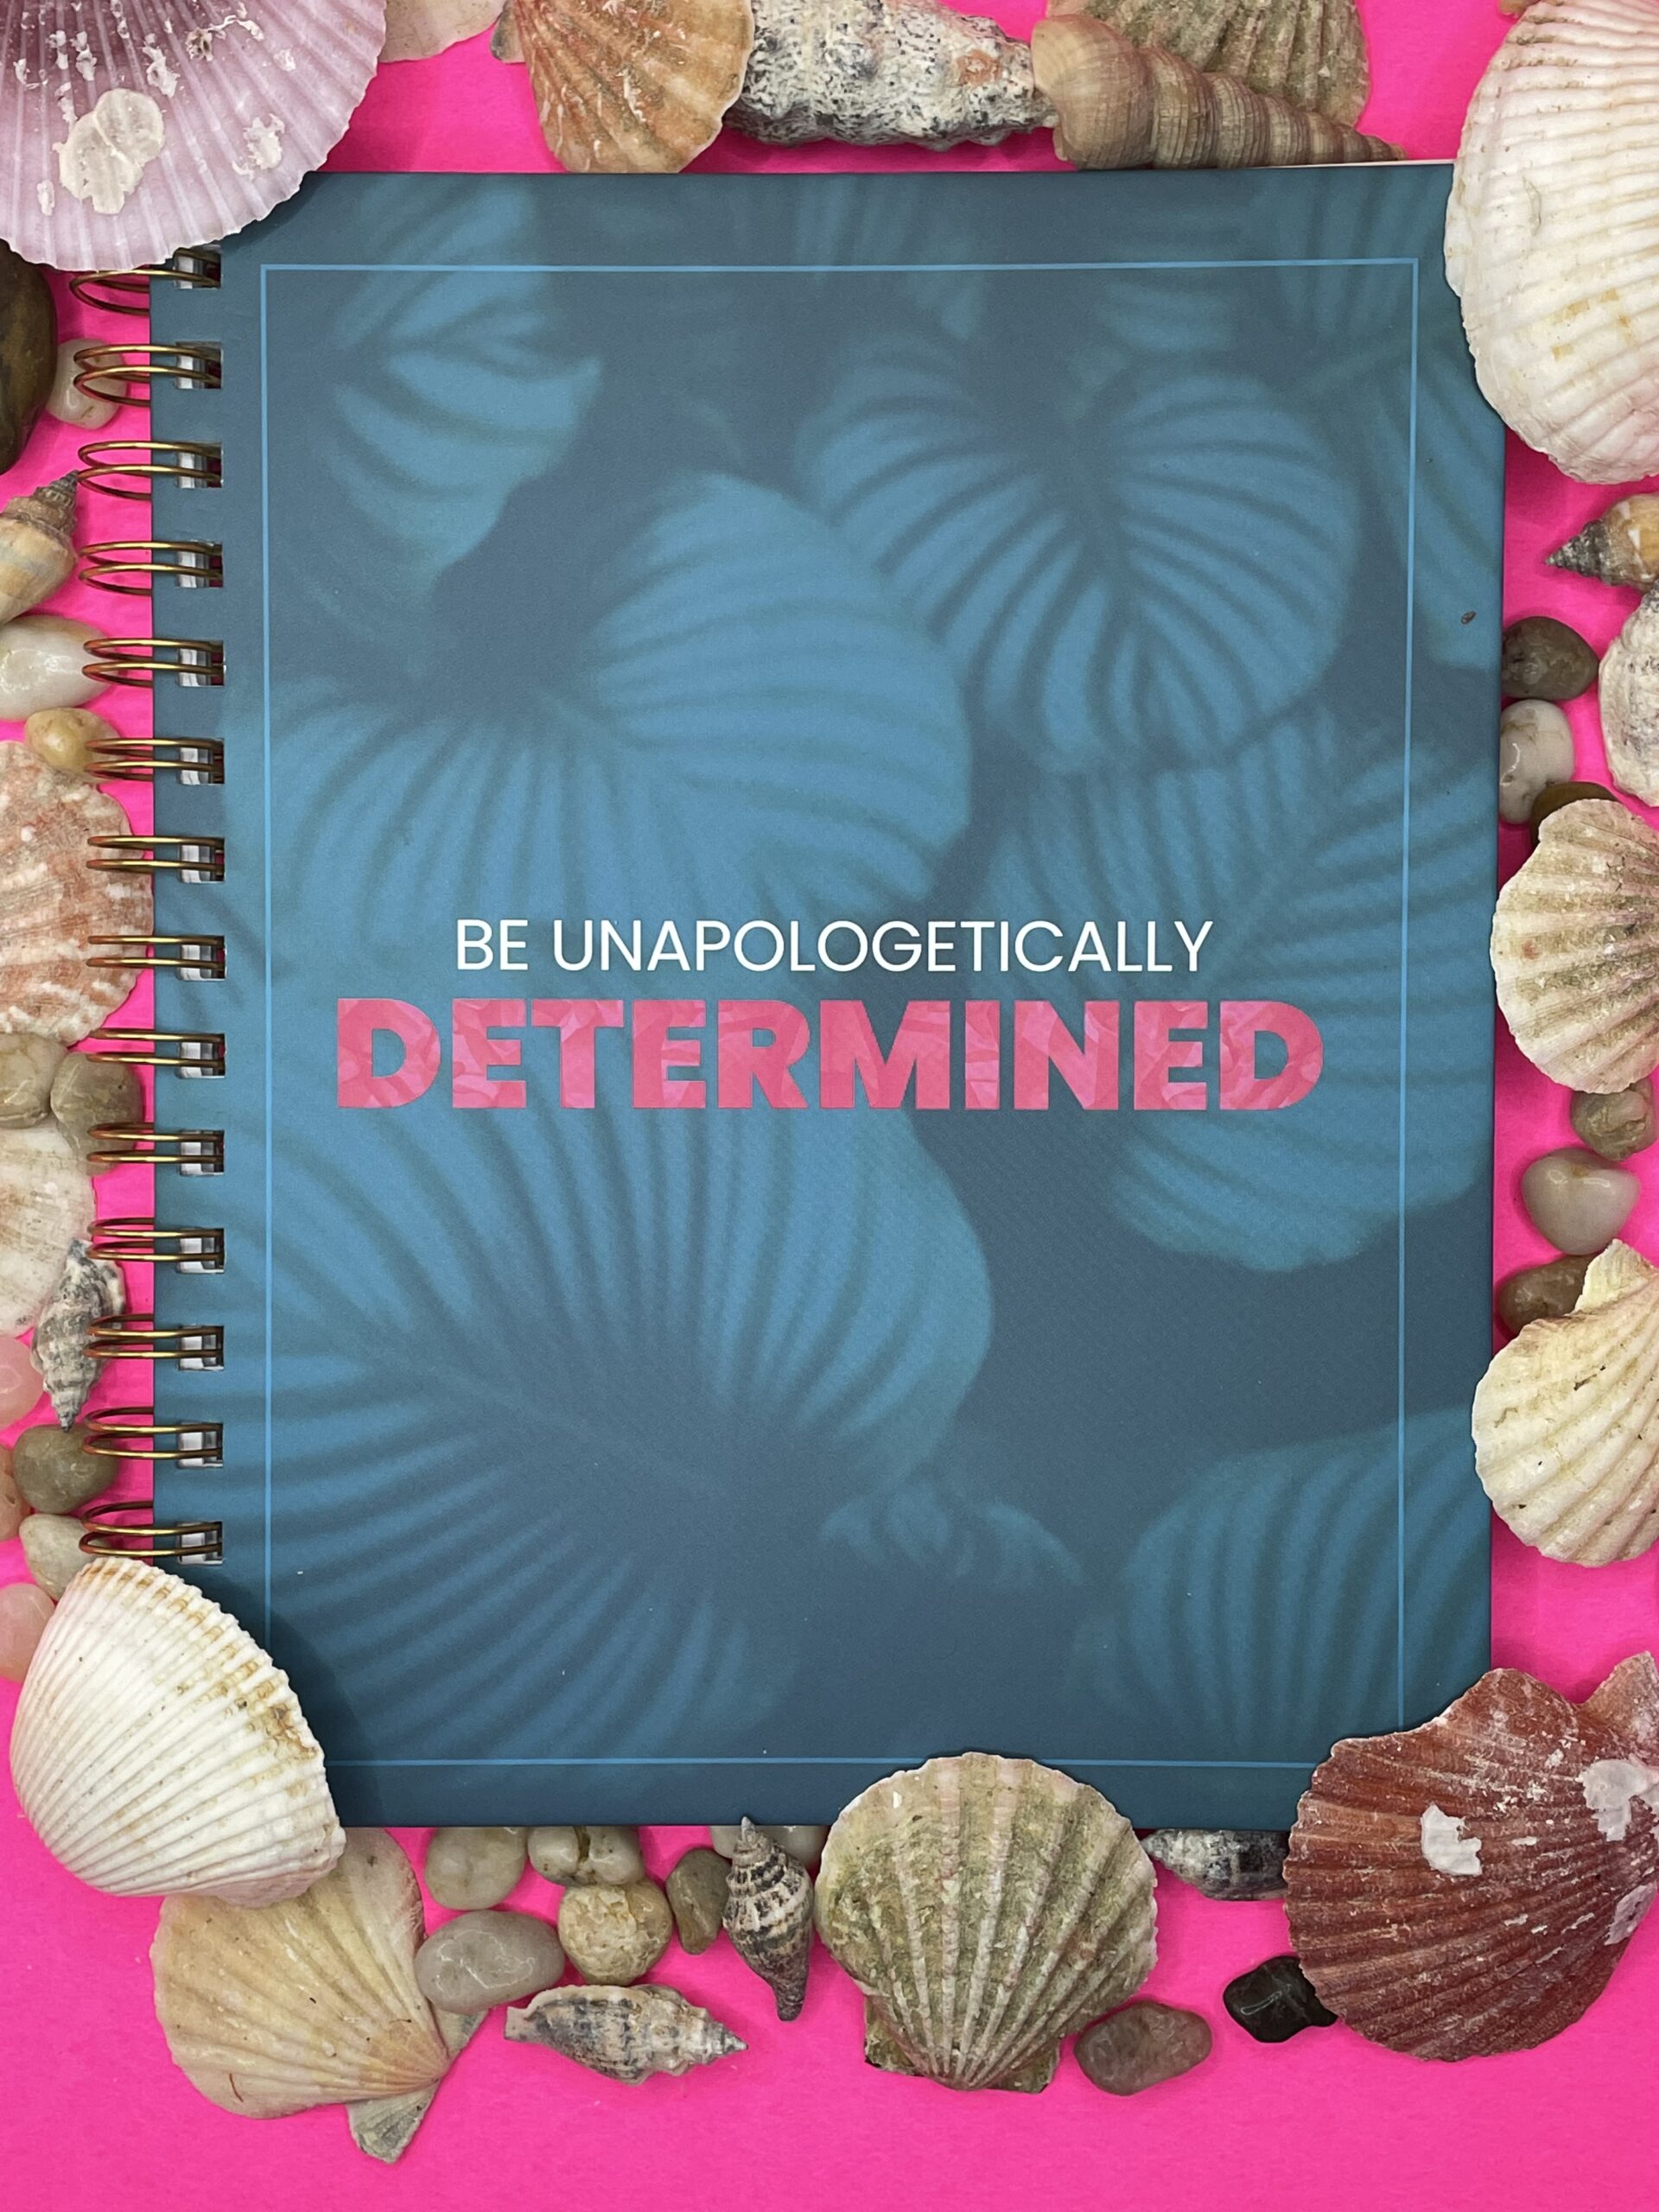 A turquoise blue notebook with light blue shells. The words "Be Unapologetically" are small in white and "Determined" in bold hot pink text.